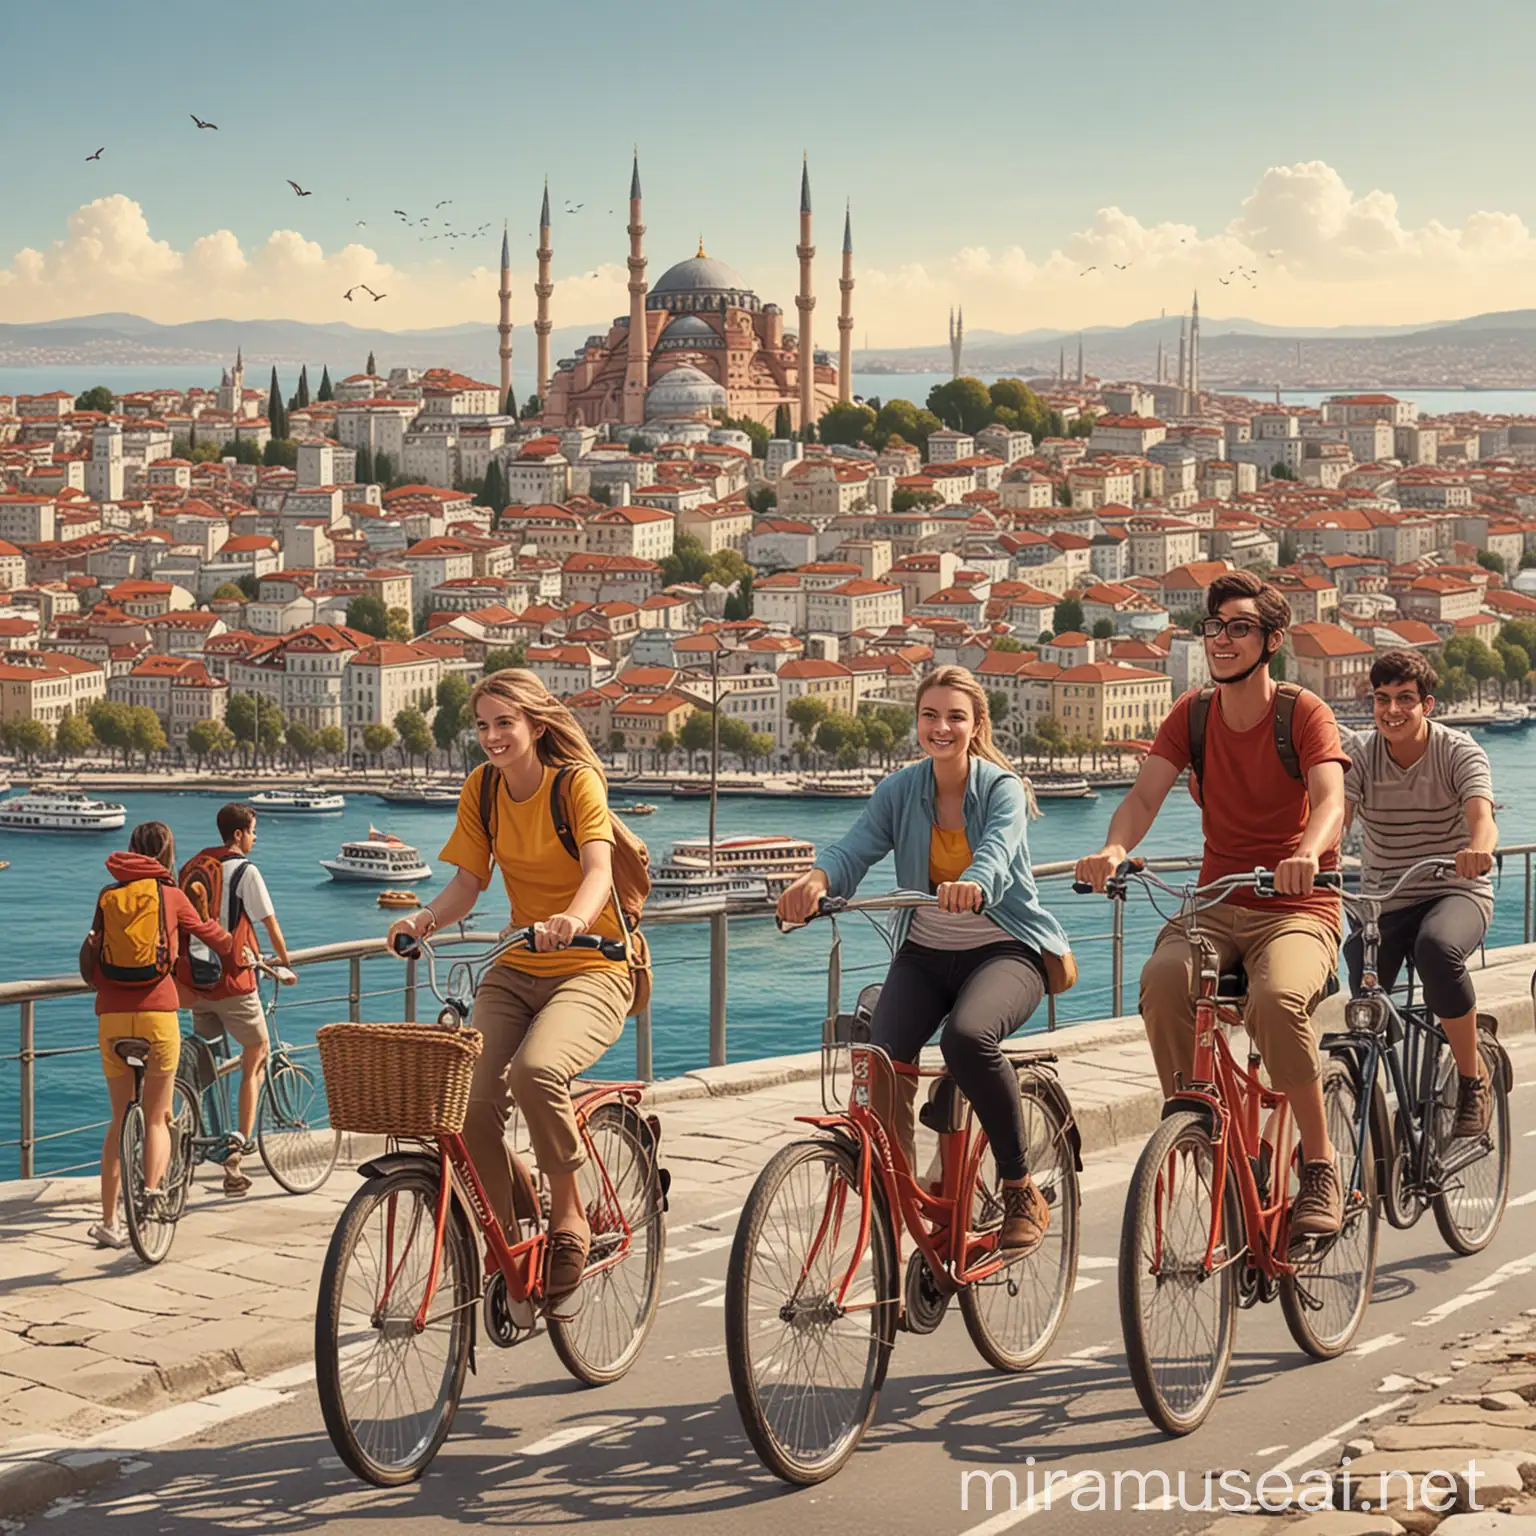 Bicycle Touring Students Explore Istanbul Captivating Distant View Illustration